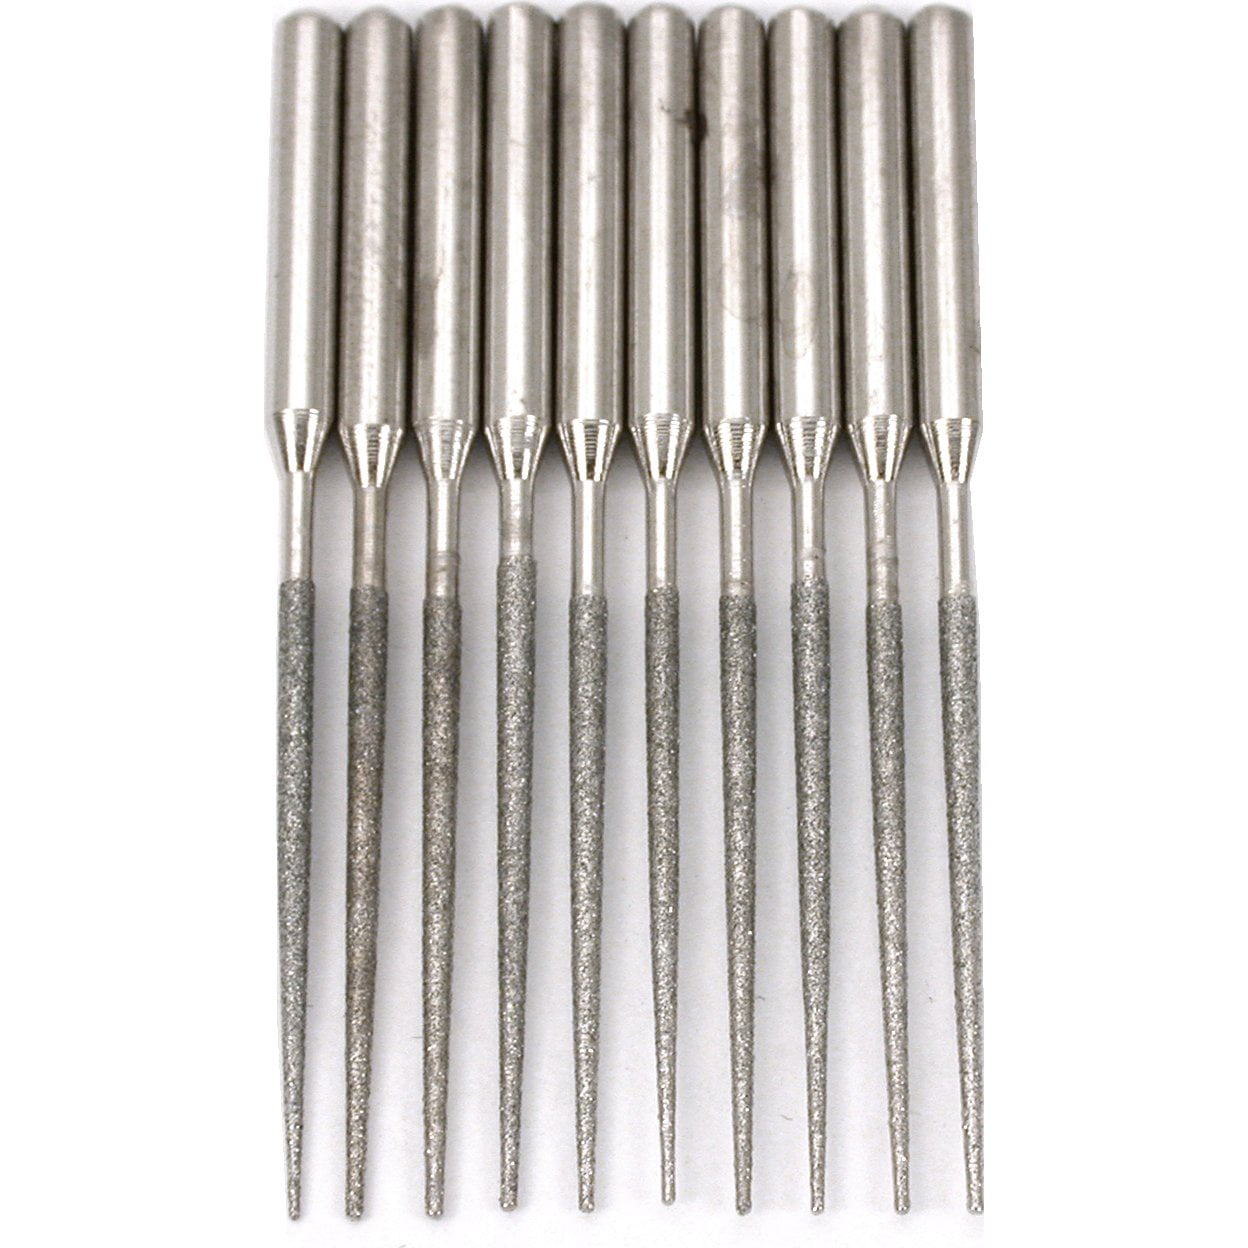 100pcs 2mm Dia Silver Diamond Coated Jewelry Carving Drill Hole Tools